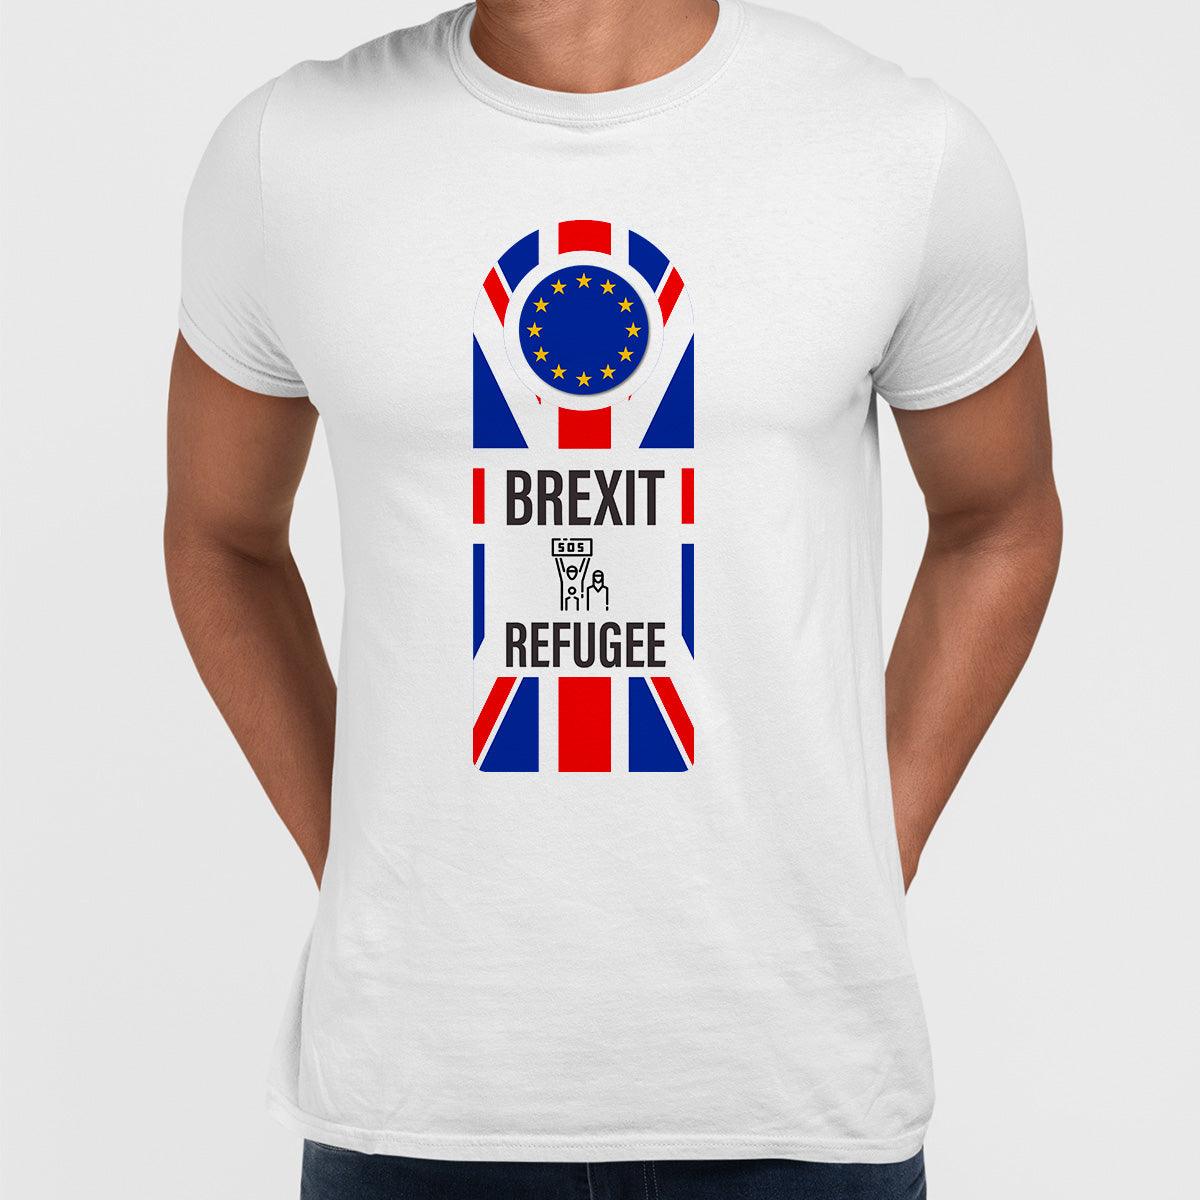 Brexit Day - Brexit refugee - Kuzi Tees